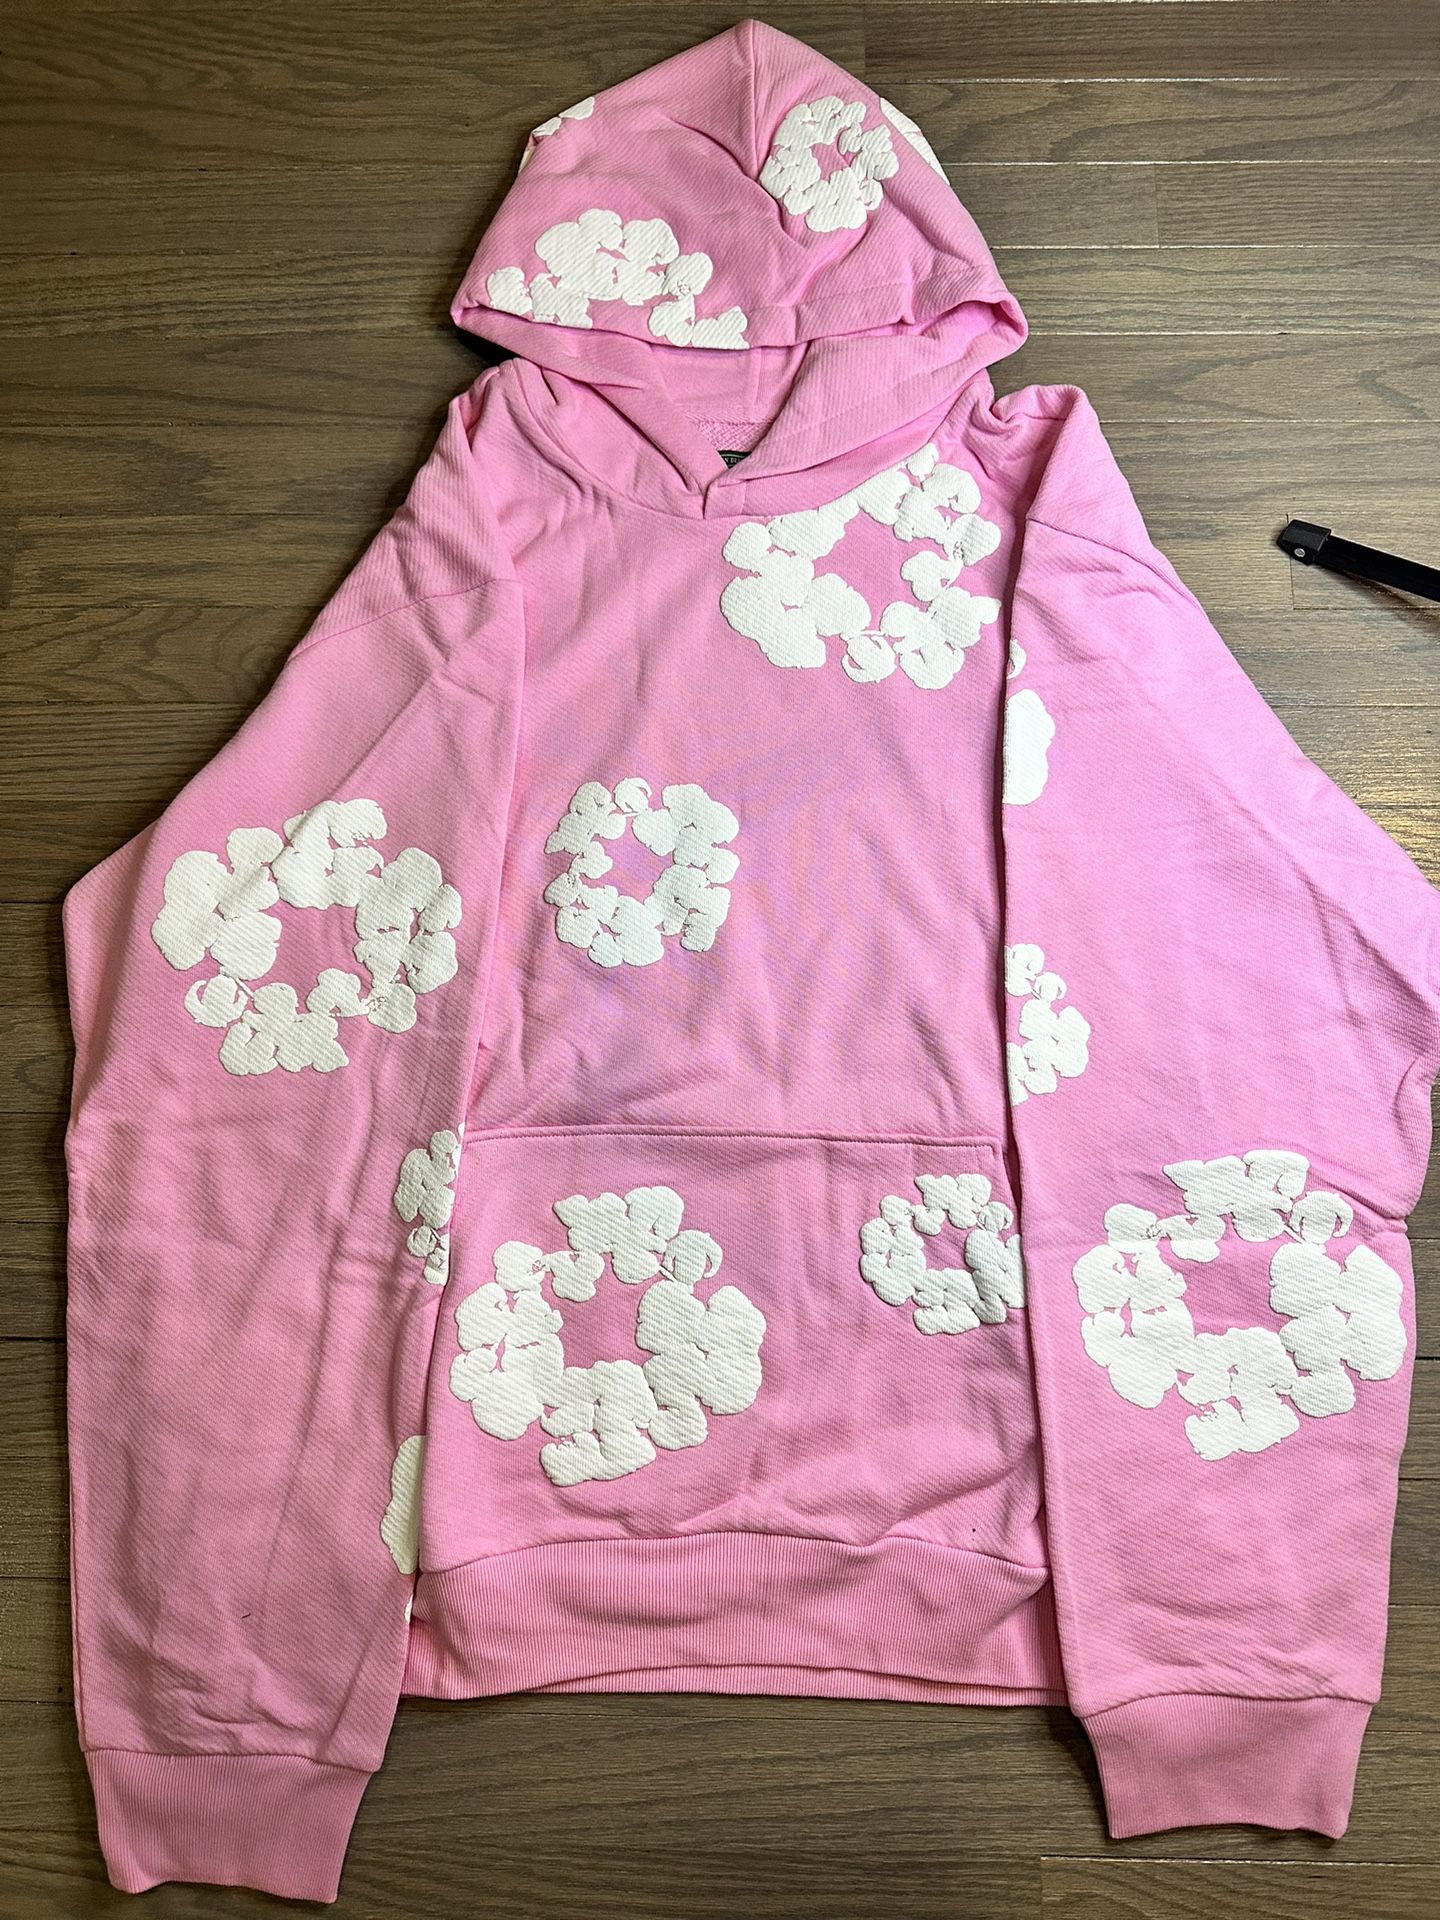 Pink Denim Tears Hoodie 100% Authentic Size XL